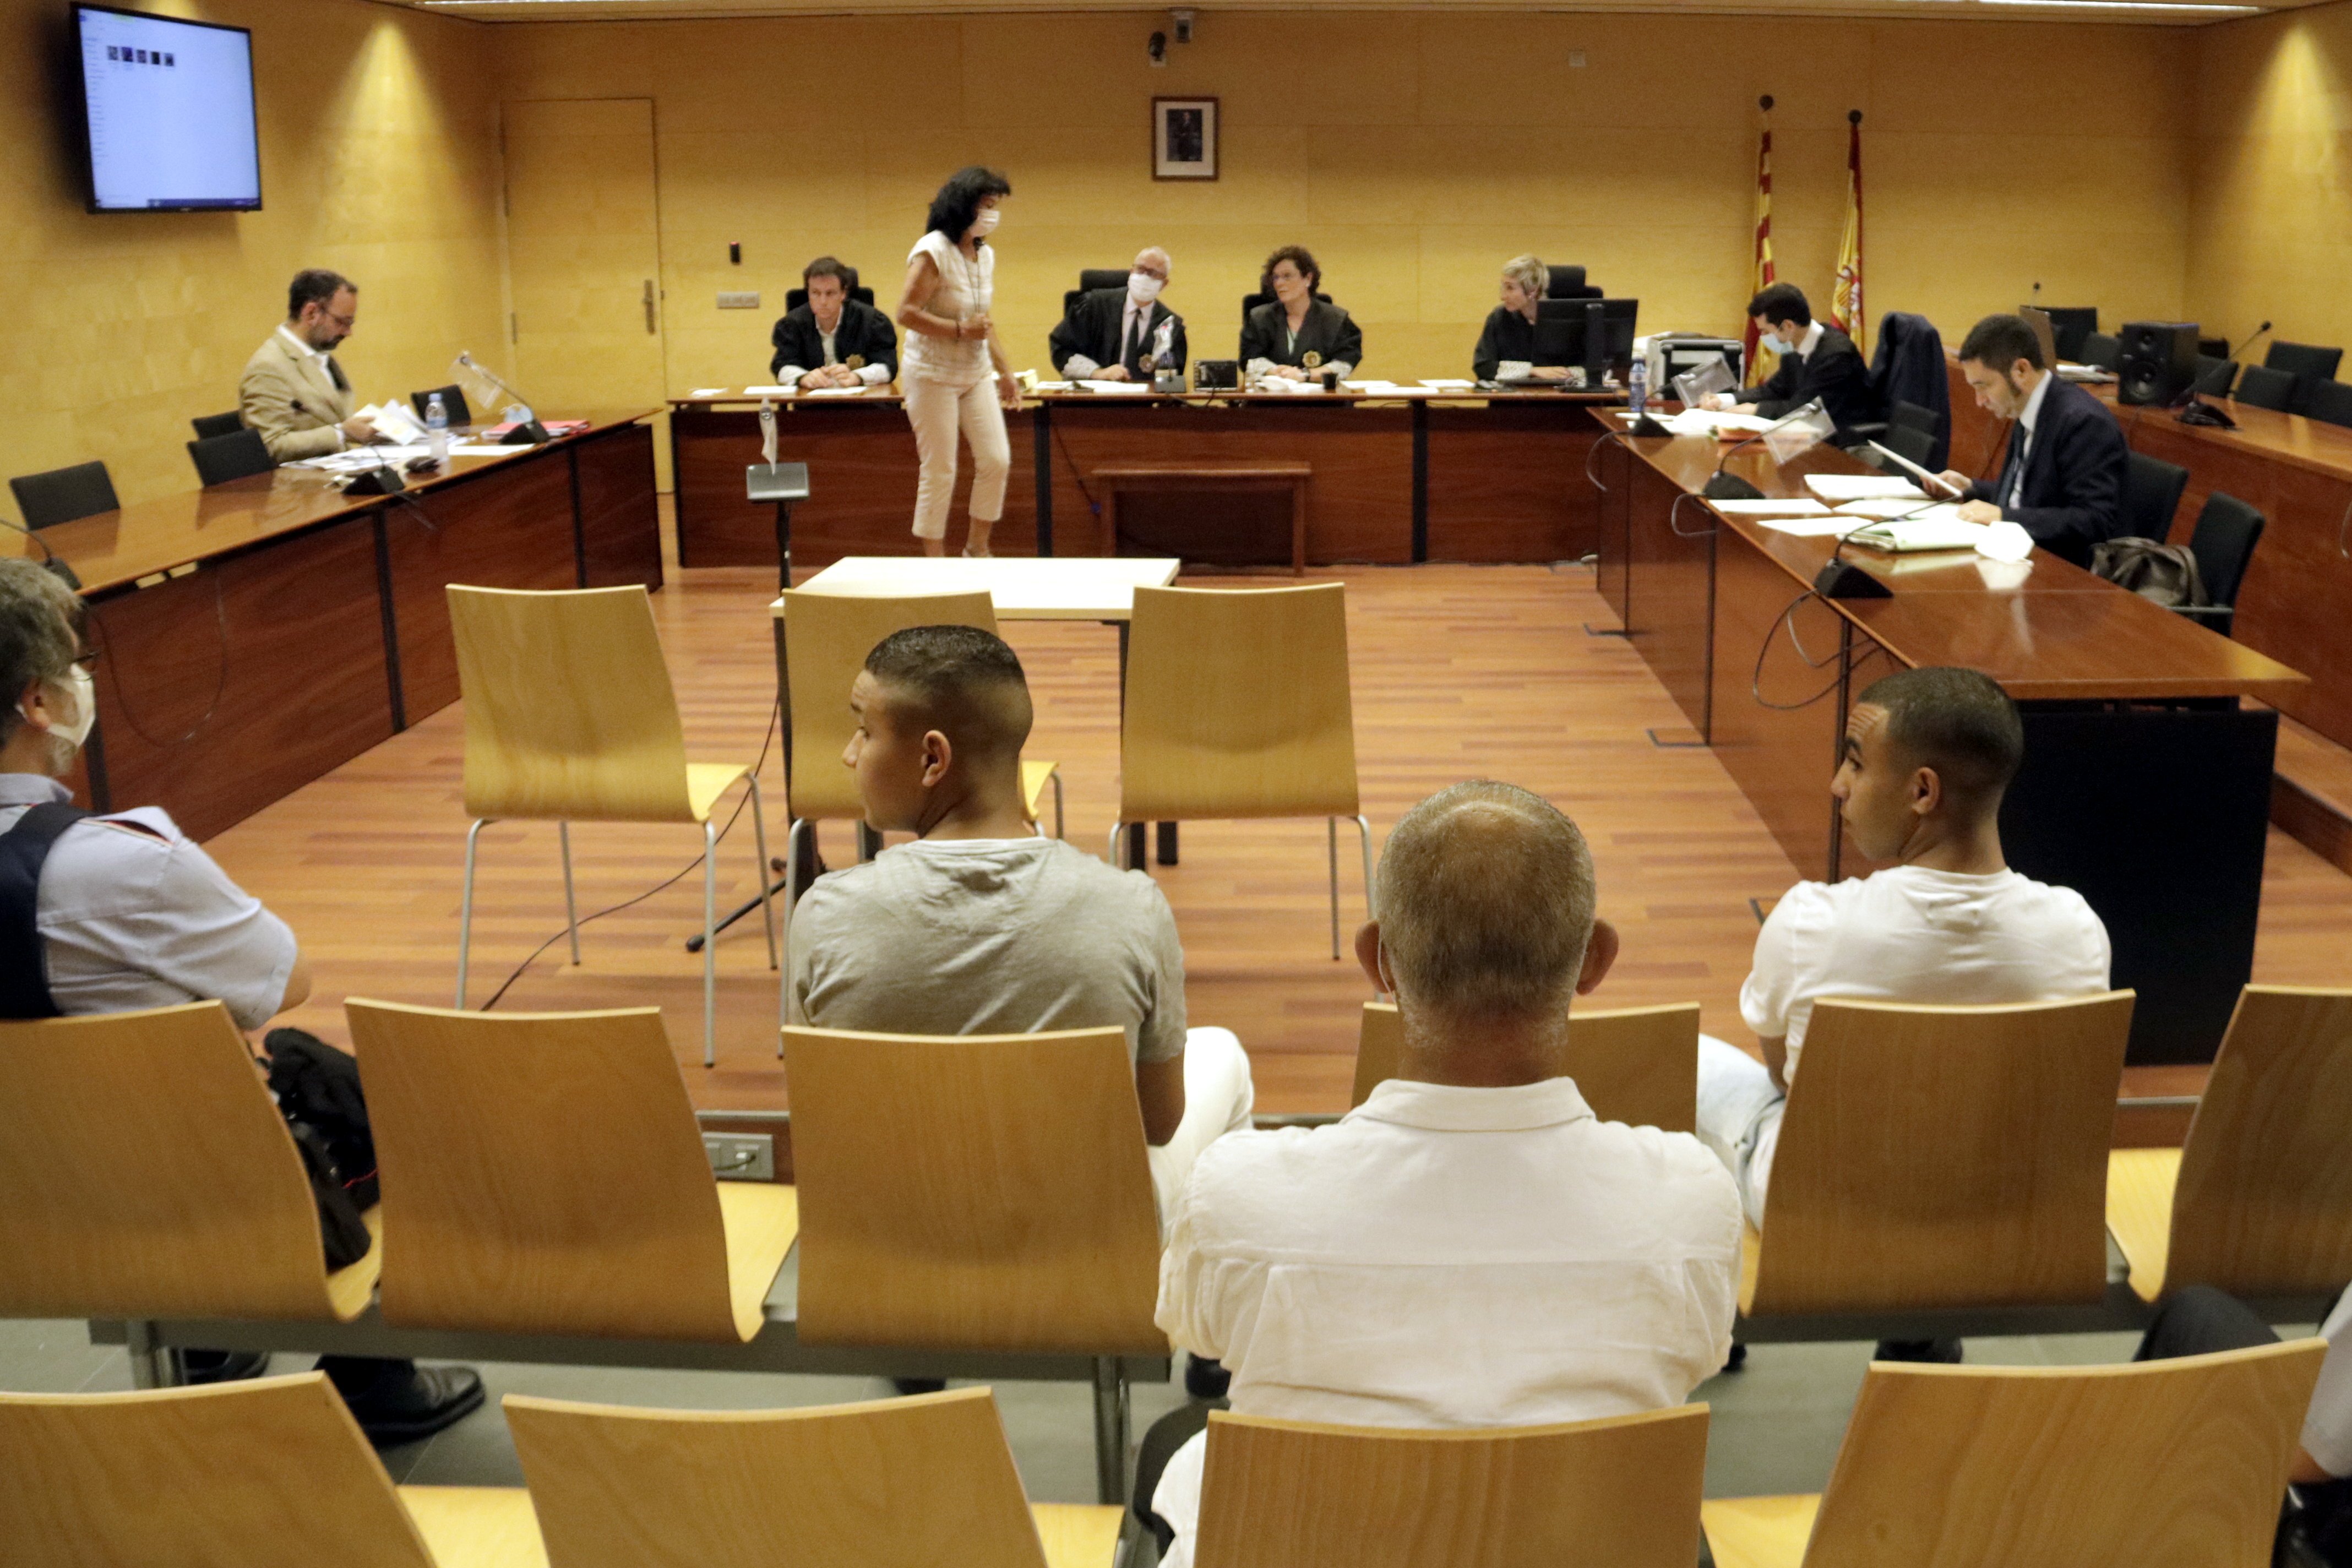 Claims of "racism" at first trial relating to last October's Catalonia riots